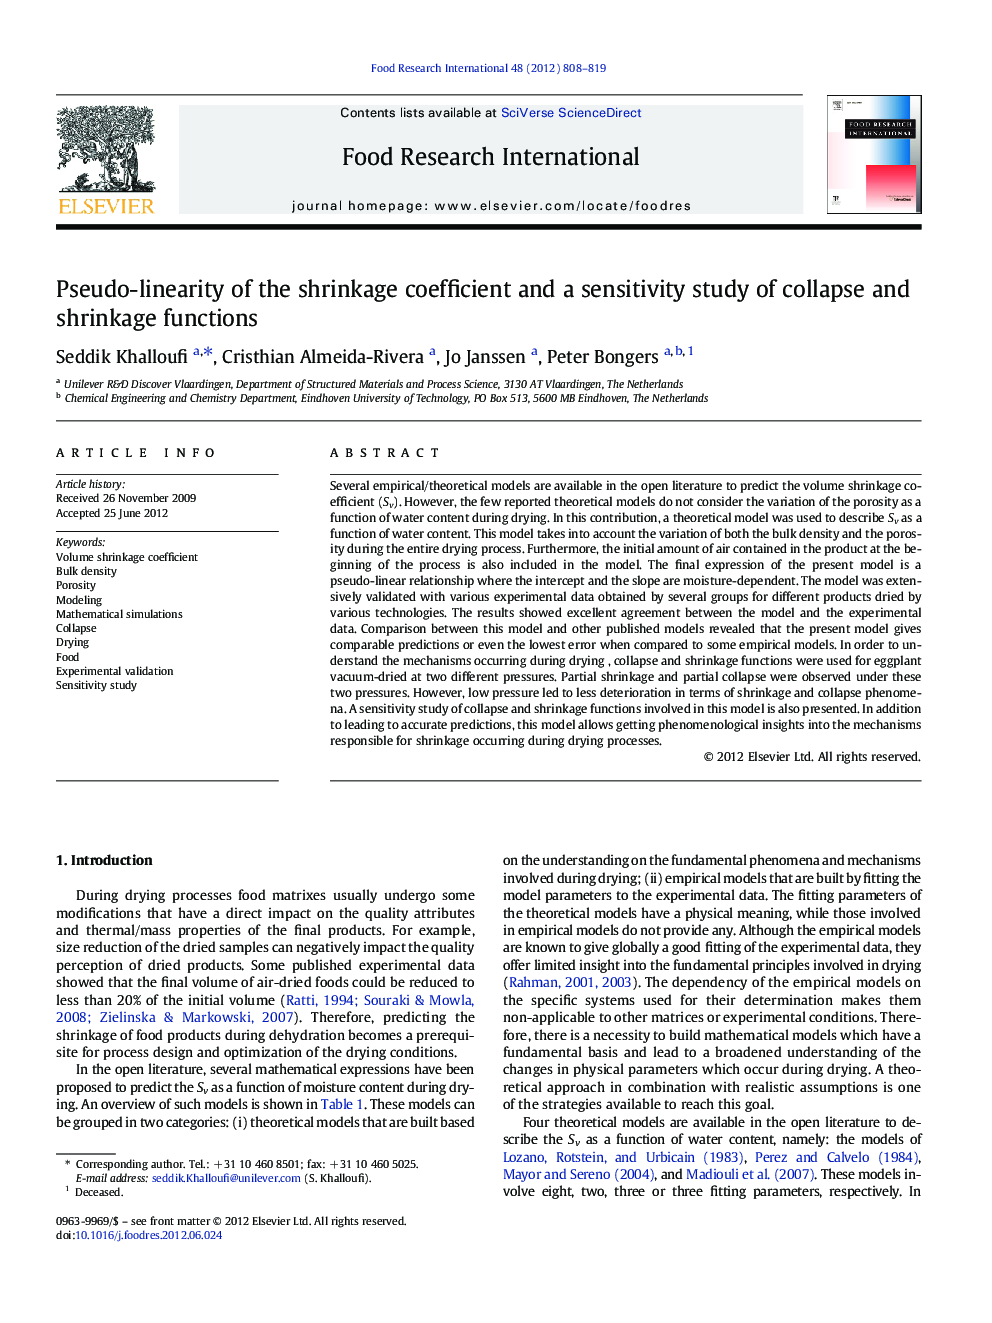 Pseudo-linearity of the shrinkage coefficient and a sensitivity study of collapse and shrinkage functions